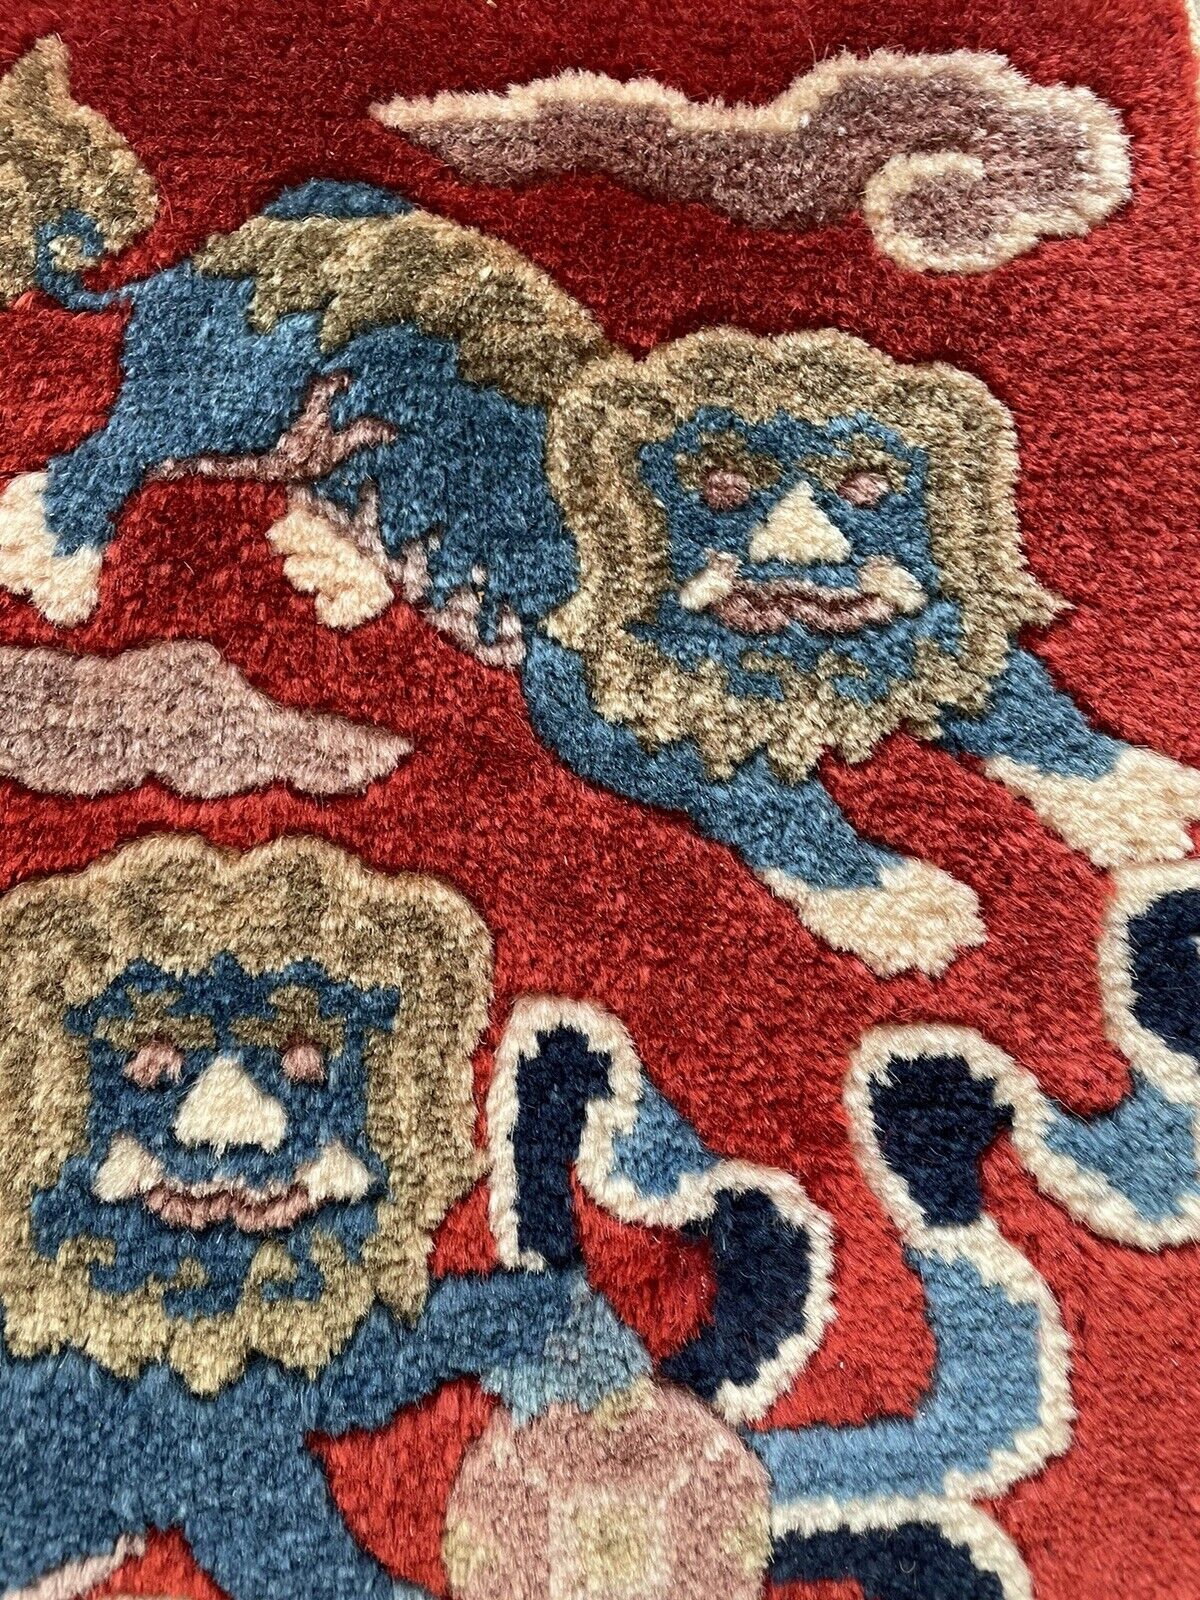 Close-up of craftsmanship on Handmade Antique Art Deco Chinese Mat - Detailed view highlighting the meticulous craftsmanship involved in weaving the intricate lions design.